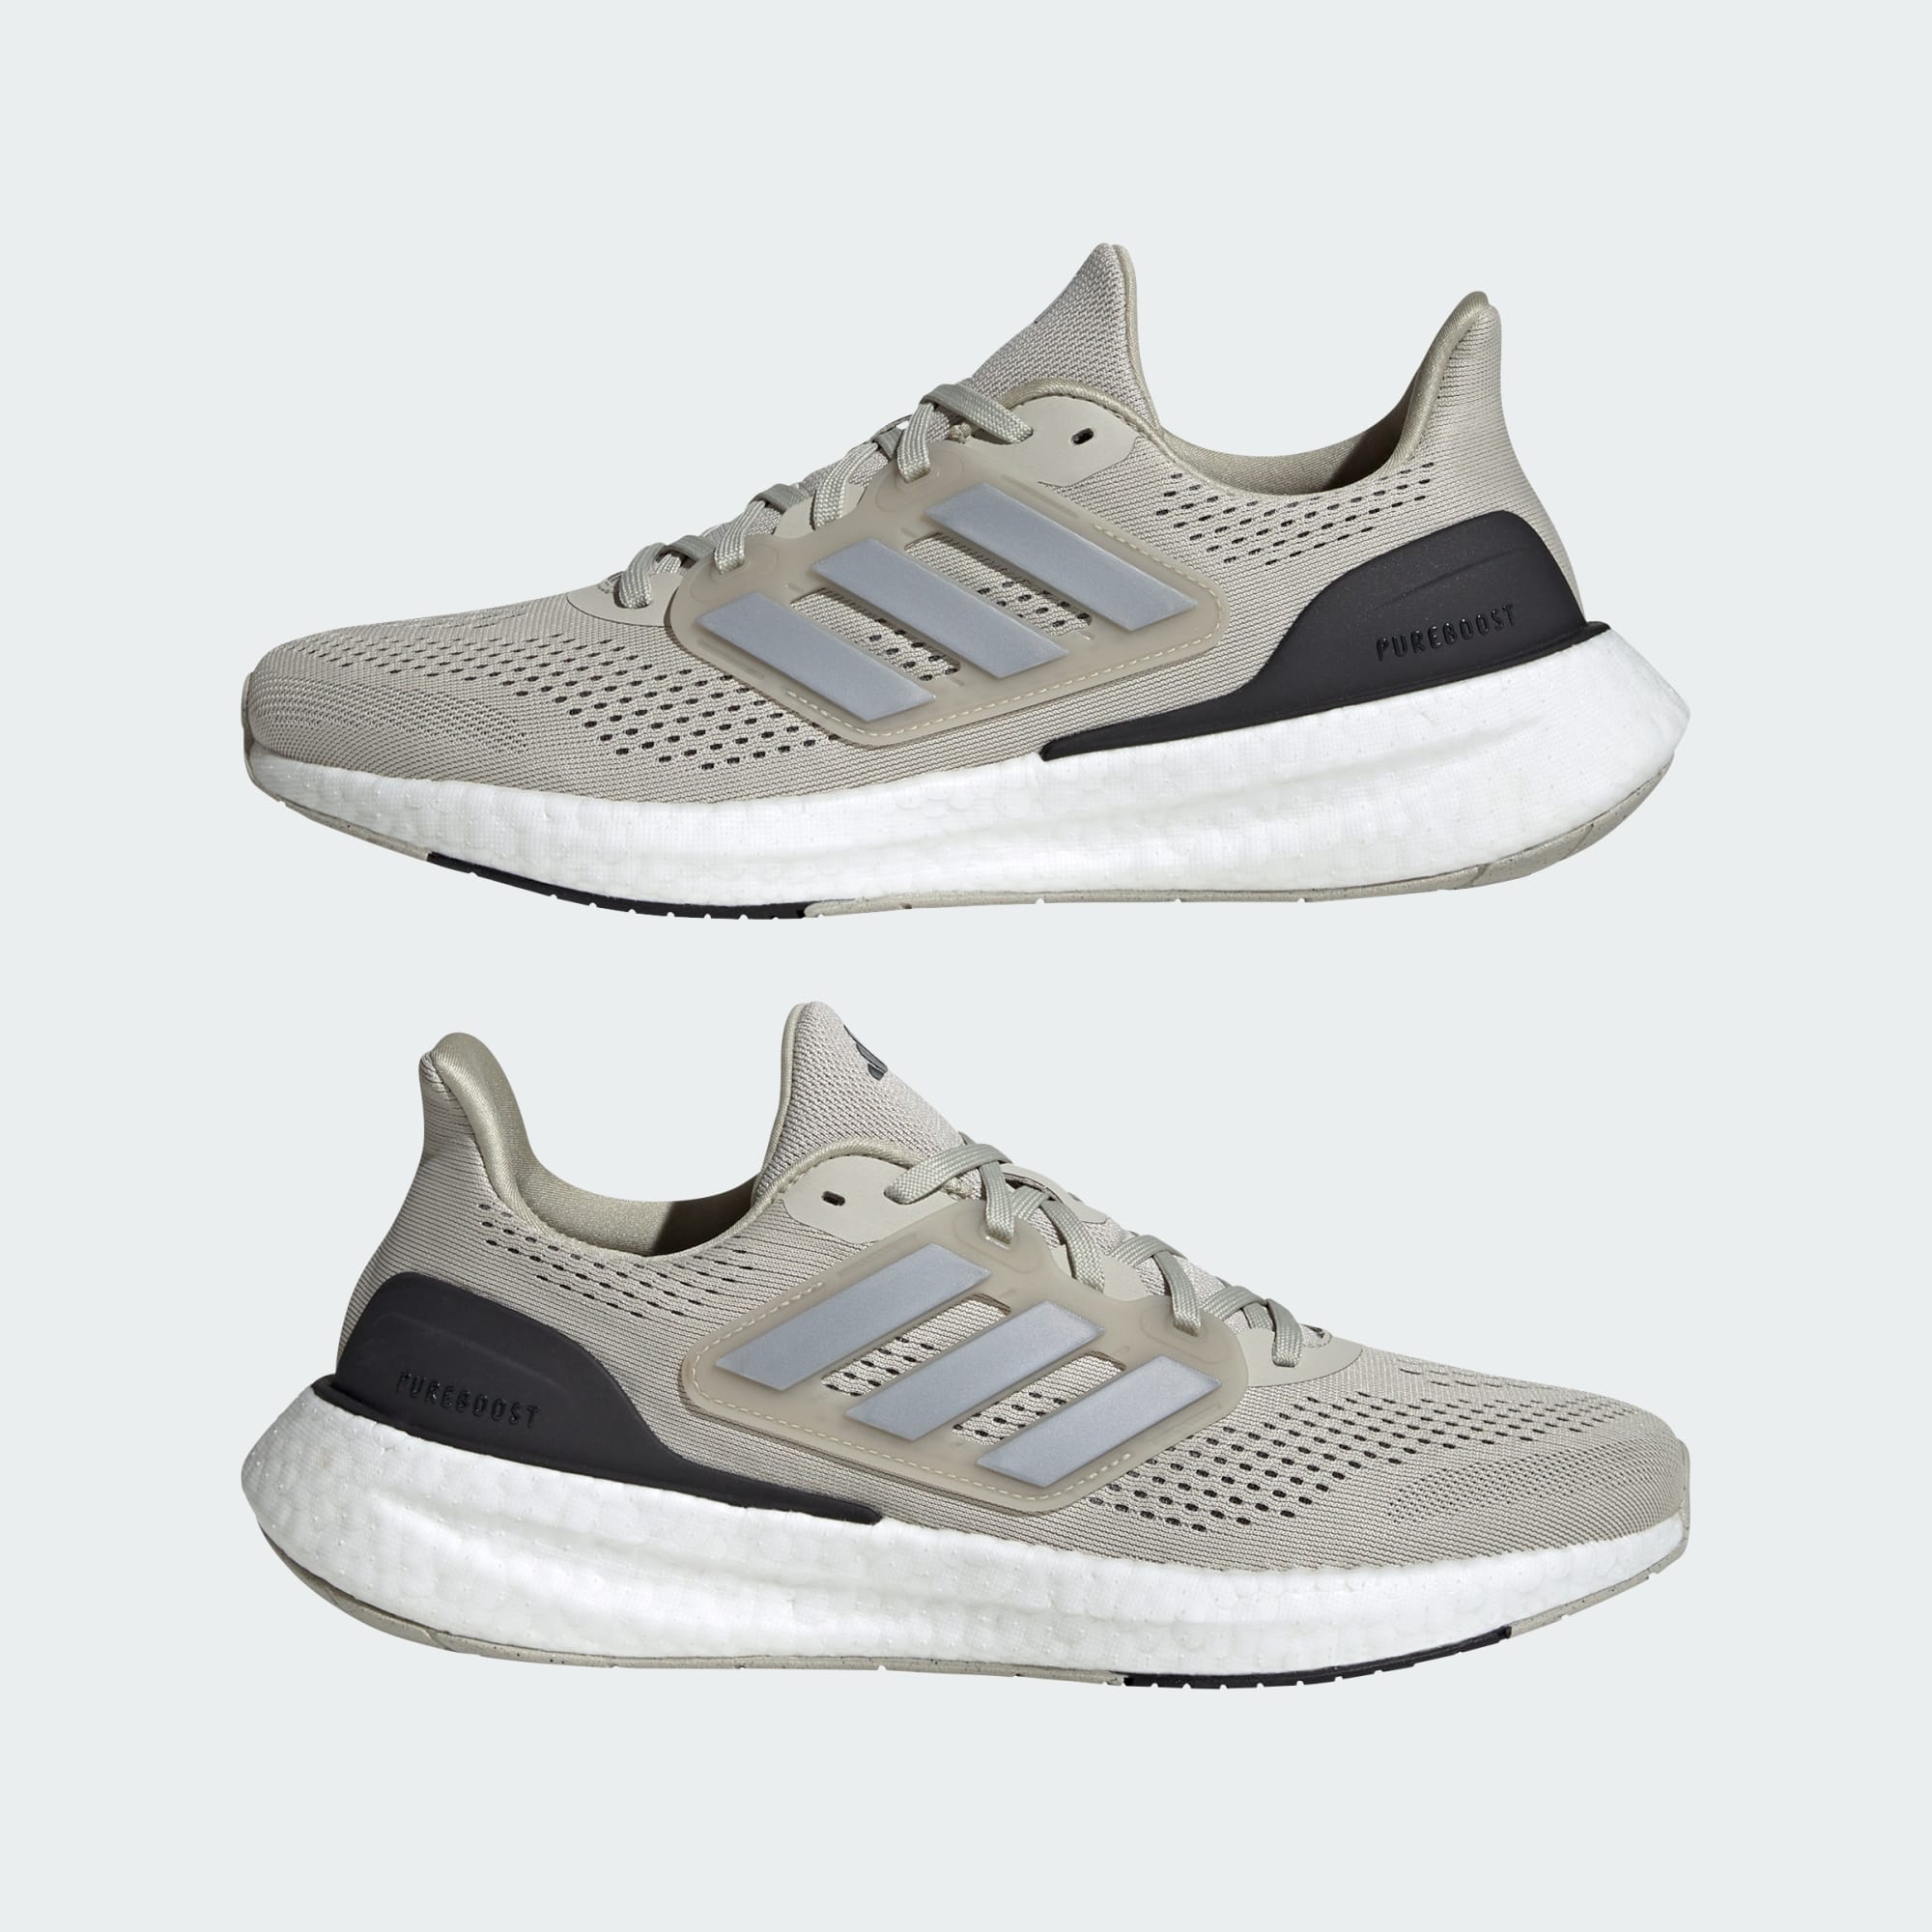 adidas Men's Pureboost 23 Running Shoes (2 colors) $49 + Free Shipping